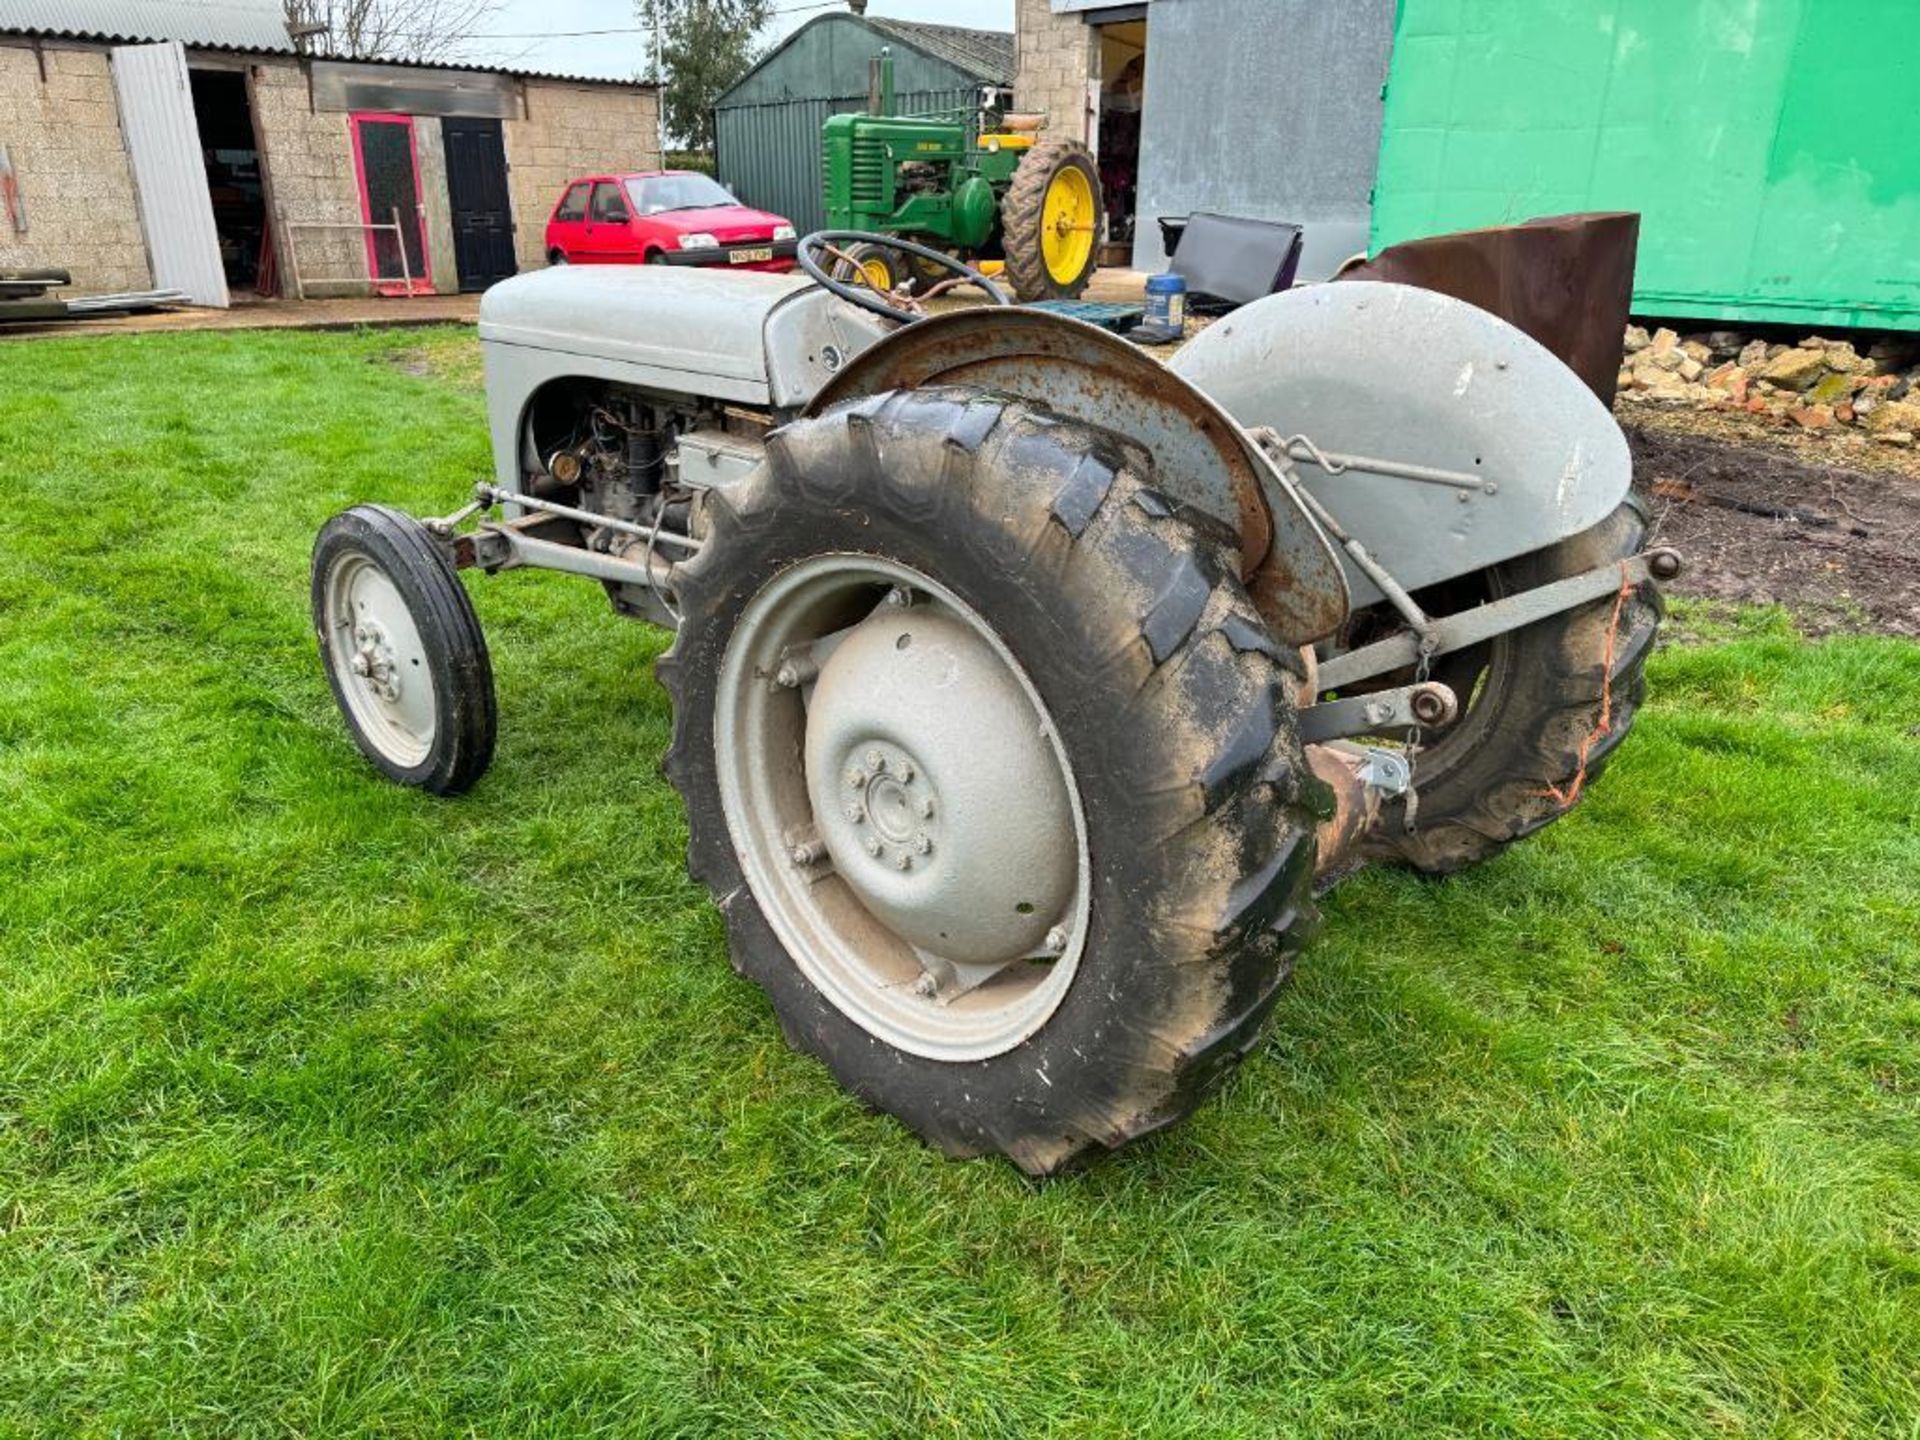 1955 Ferguson TED 2wd petrol paraffin tractor with underslung exhaust and linkage on 12.4-28 rear an - Image 4 of 11